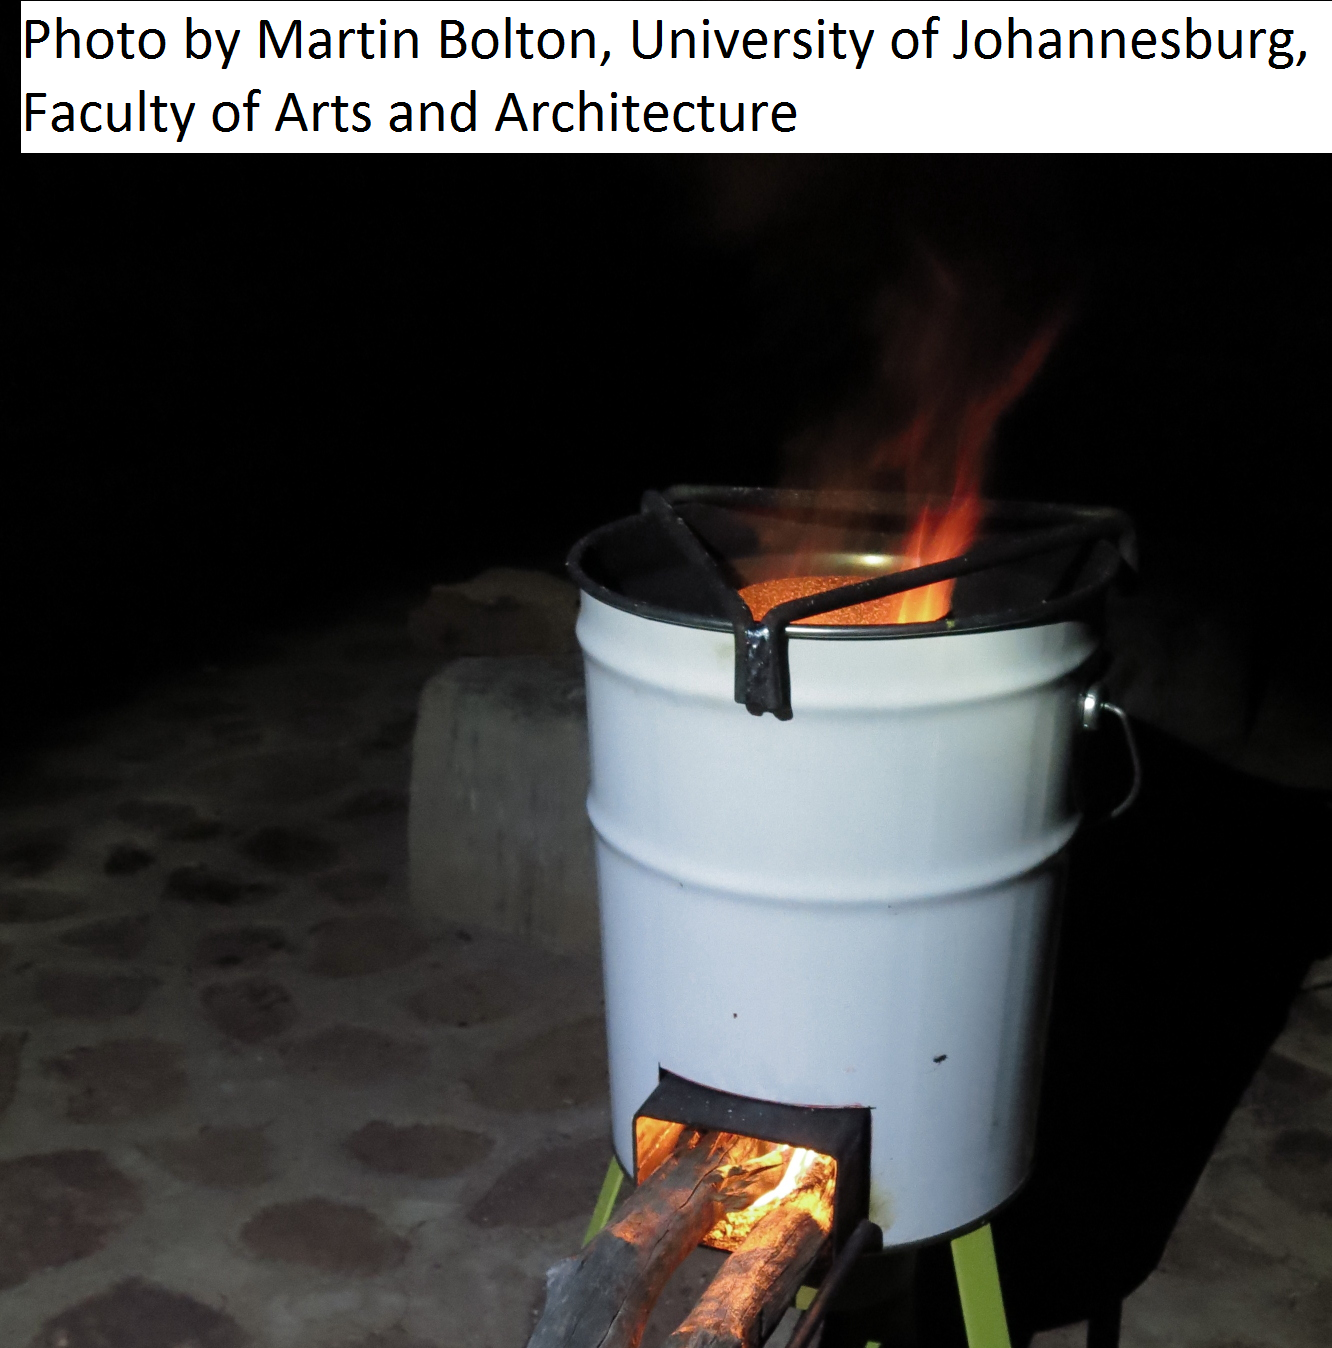 Design and development of an efficient woodburning stove